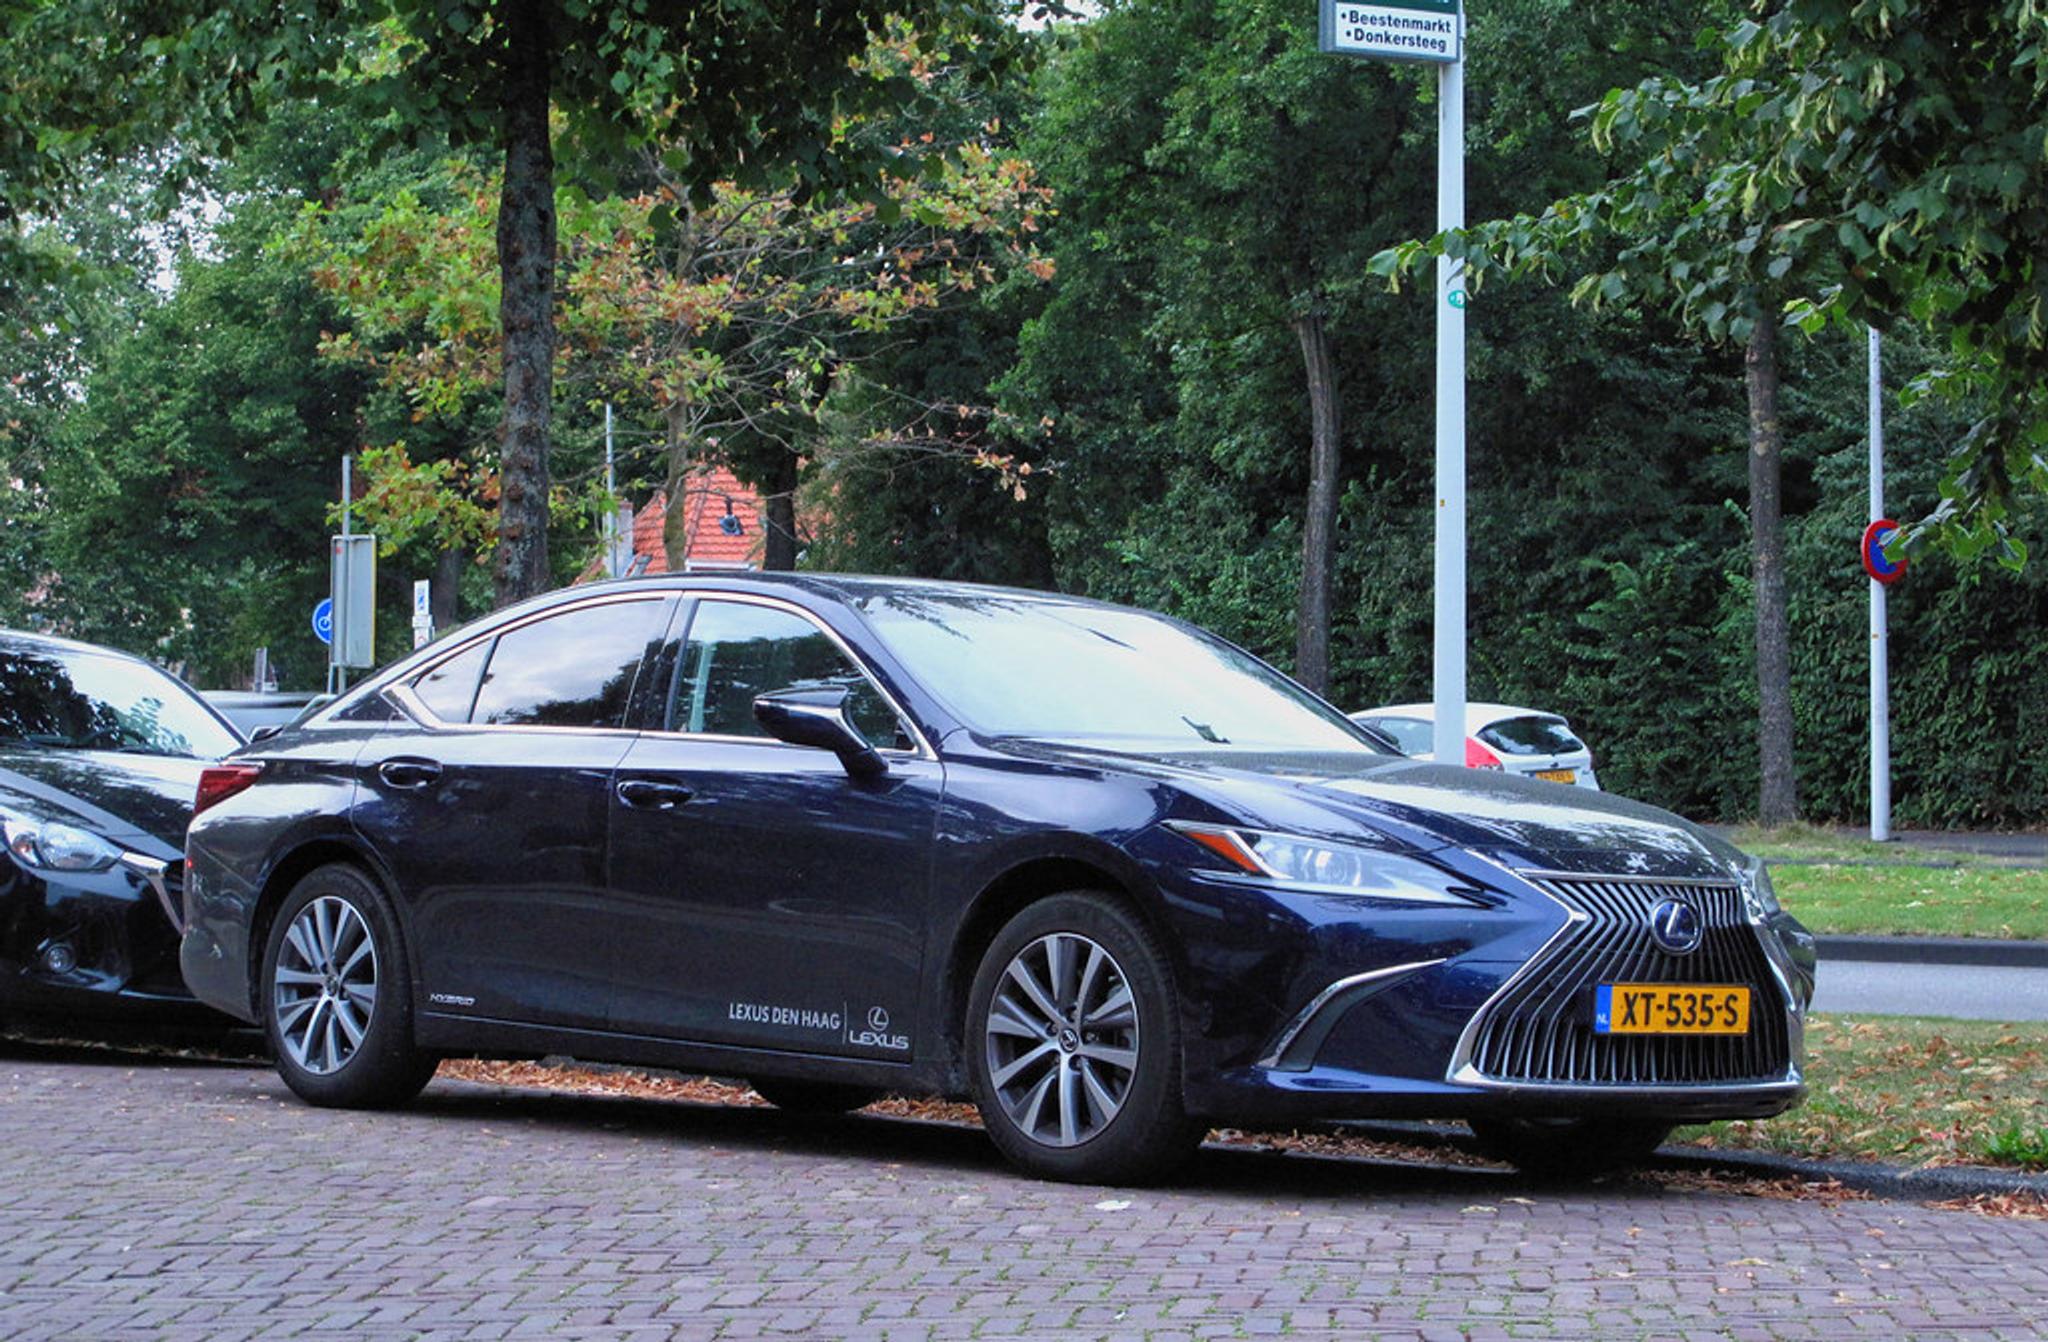 Blue Lexus ES hybrid on the side of the road